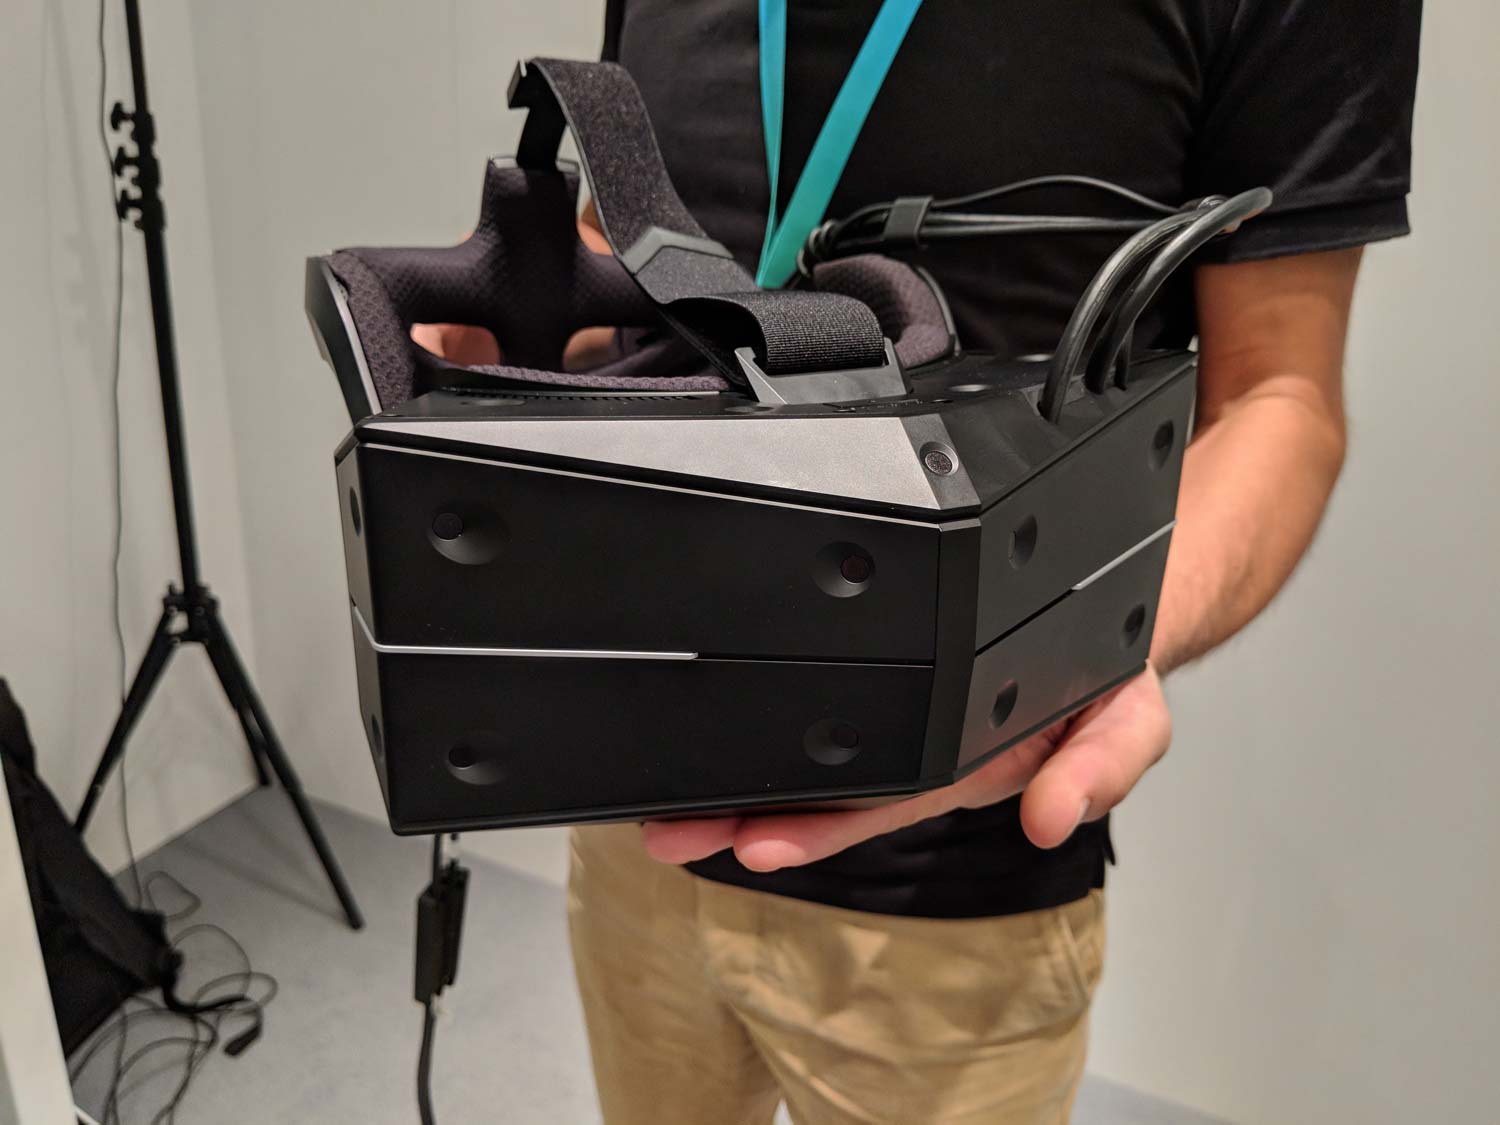 StarVR Shows What VR Should Be Like | Tom's Guide